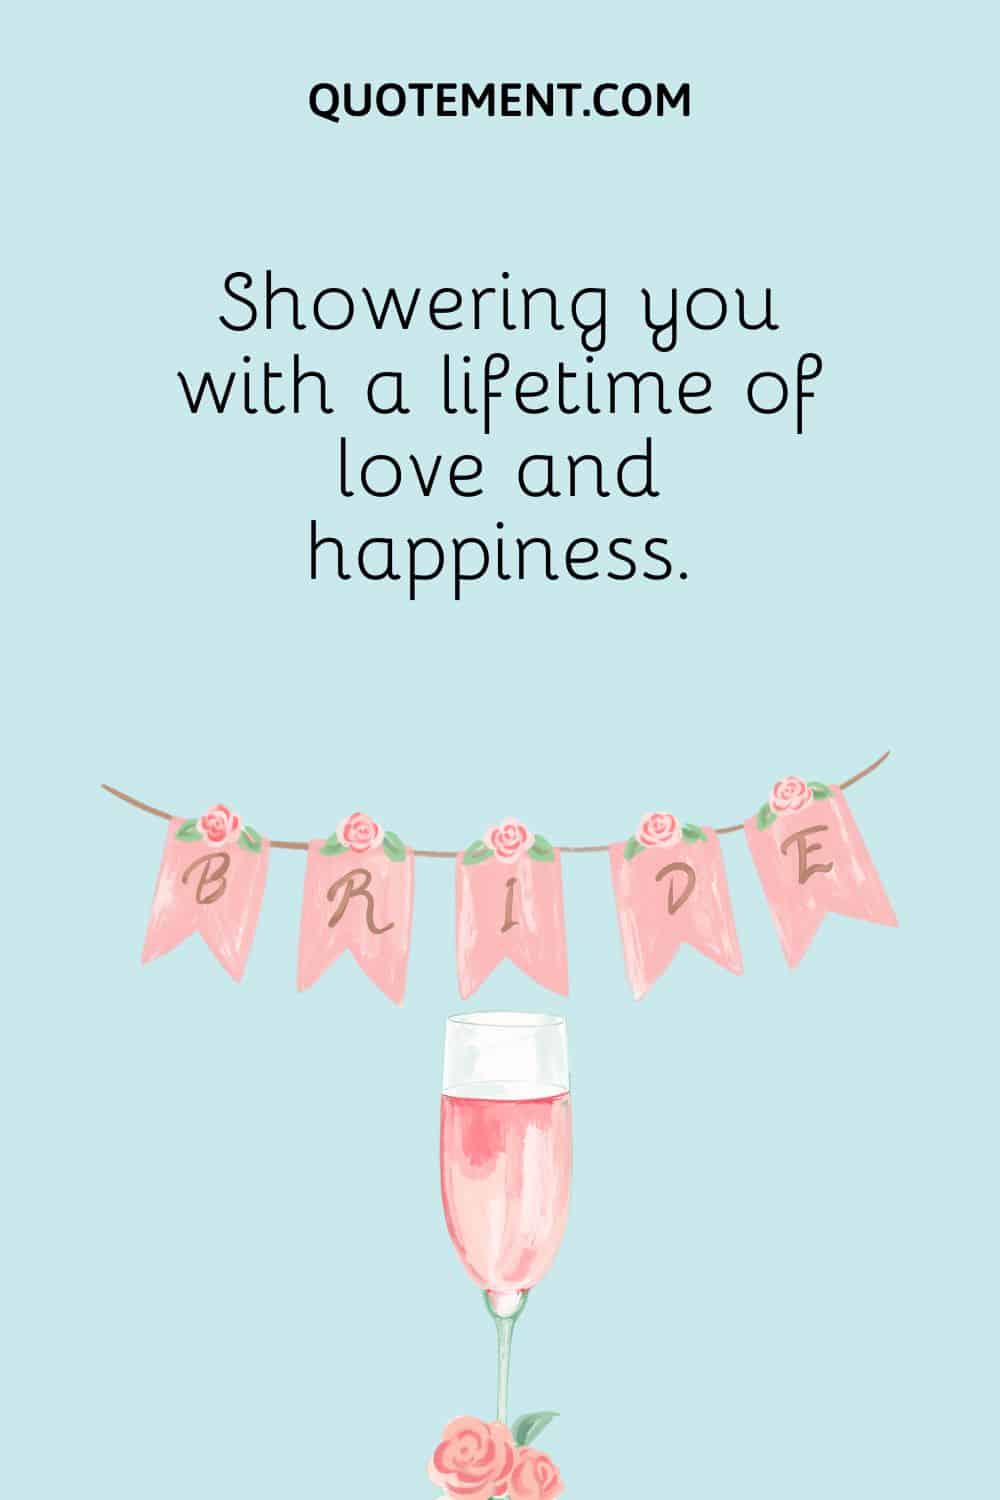 Showering you with a lifetime of love and happiness.